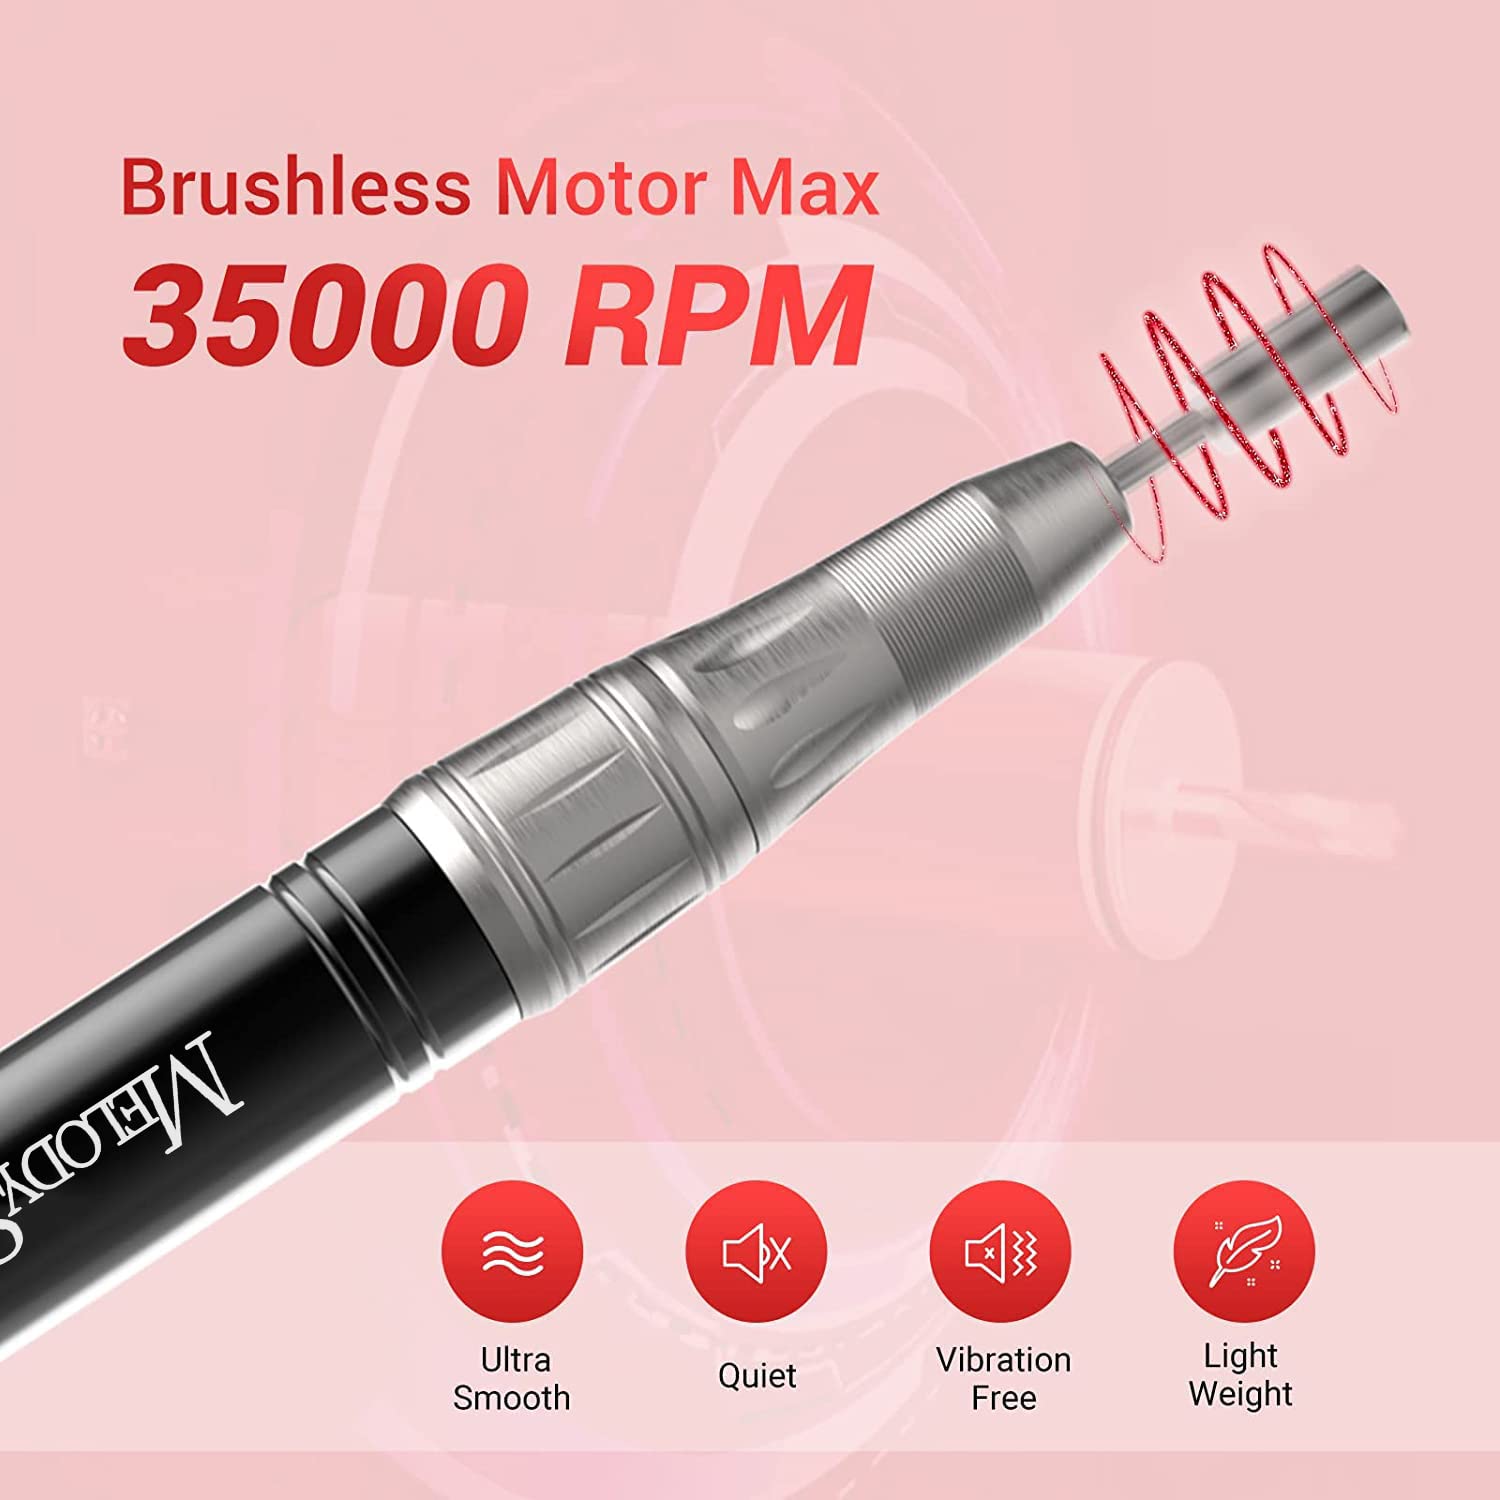 MR3-Kanon (M-B420C) Rechargeable Nail Drill 35,000 RPM